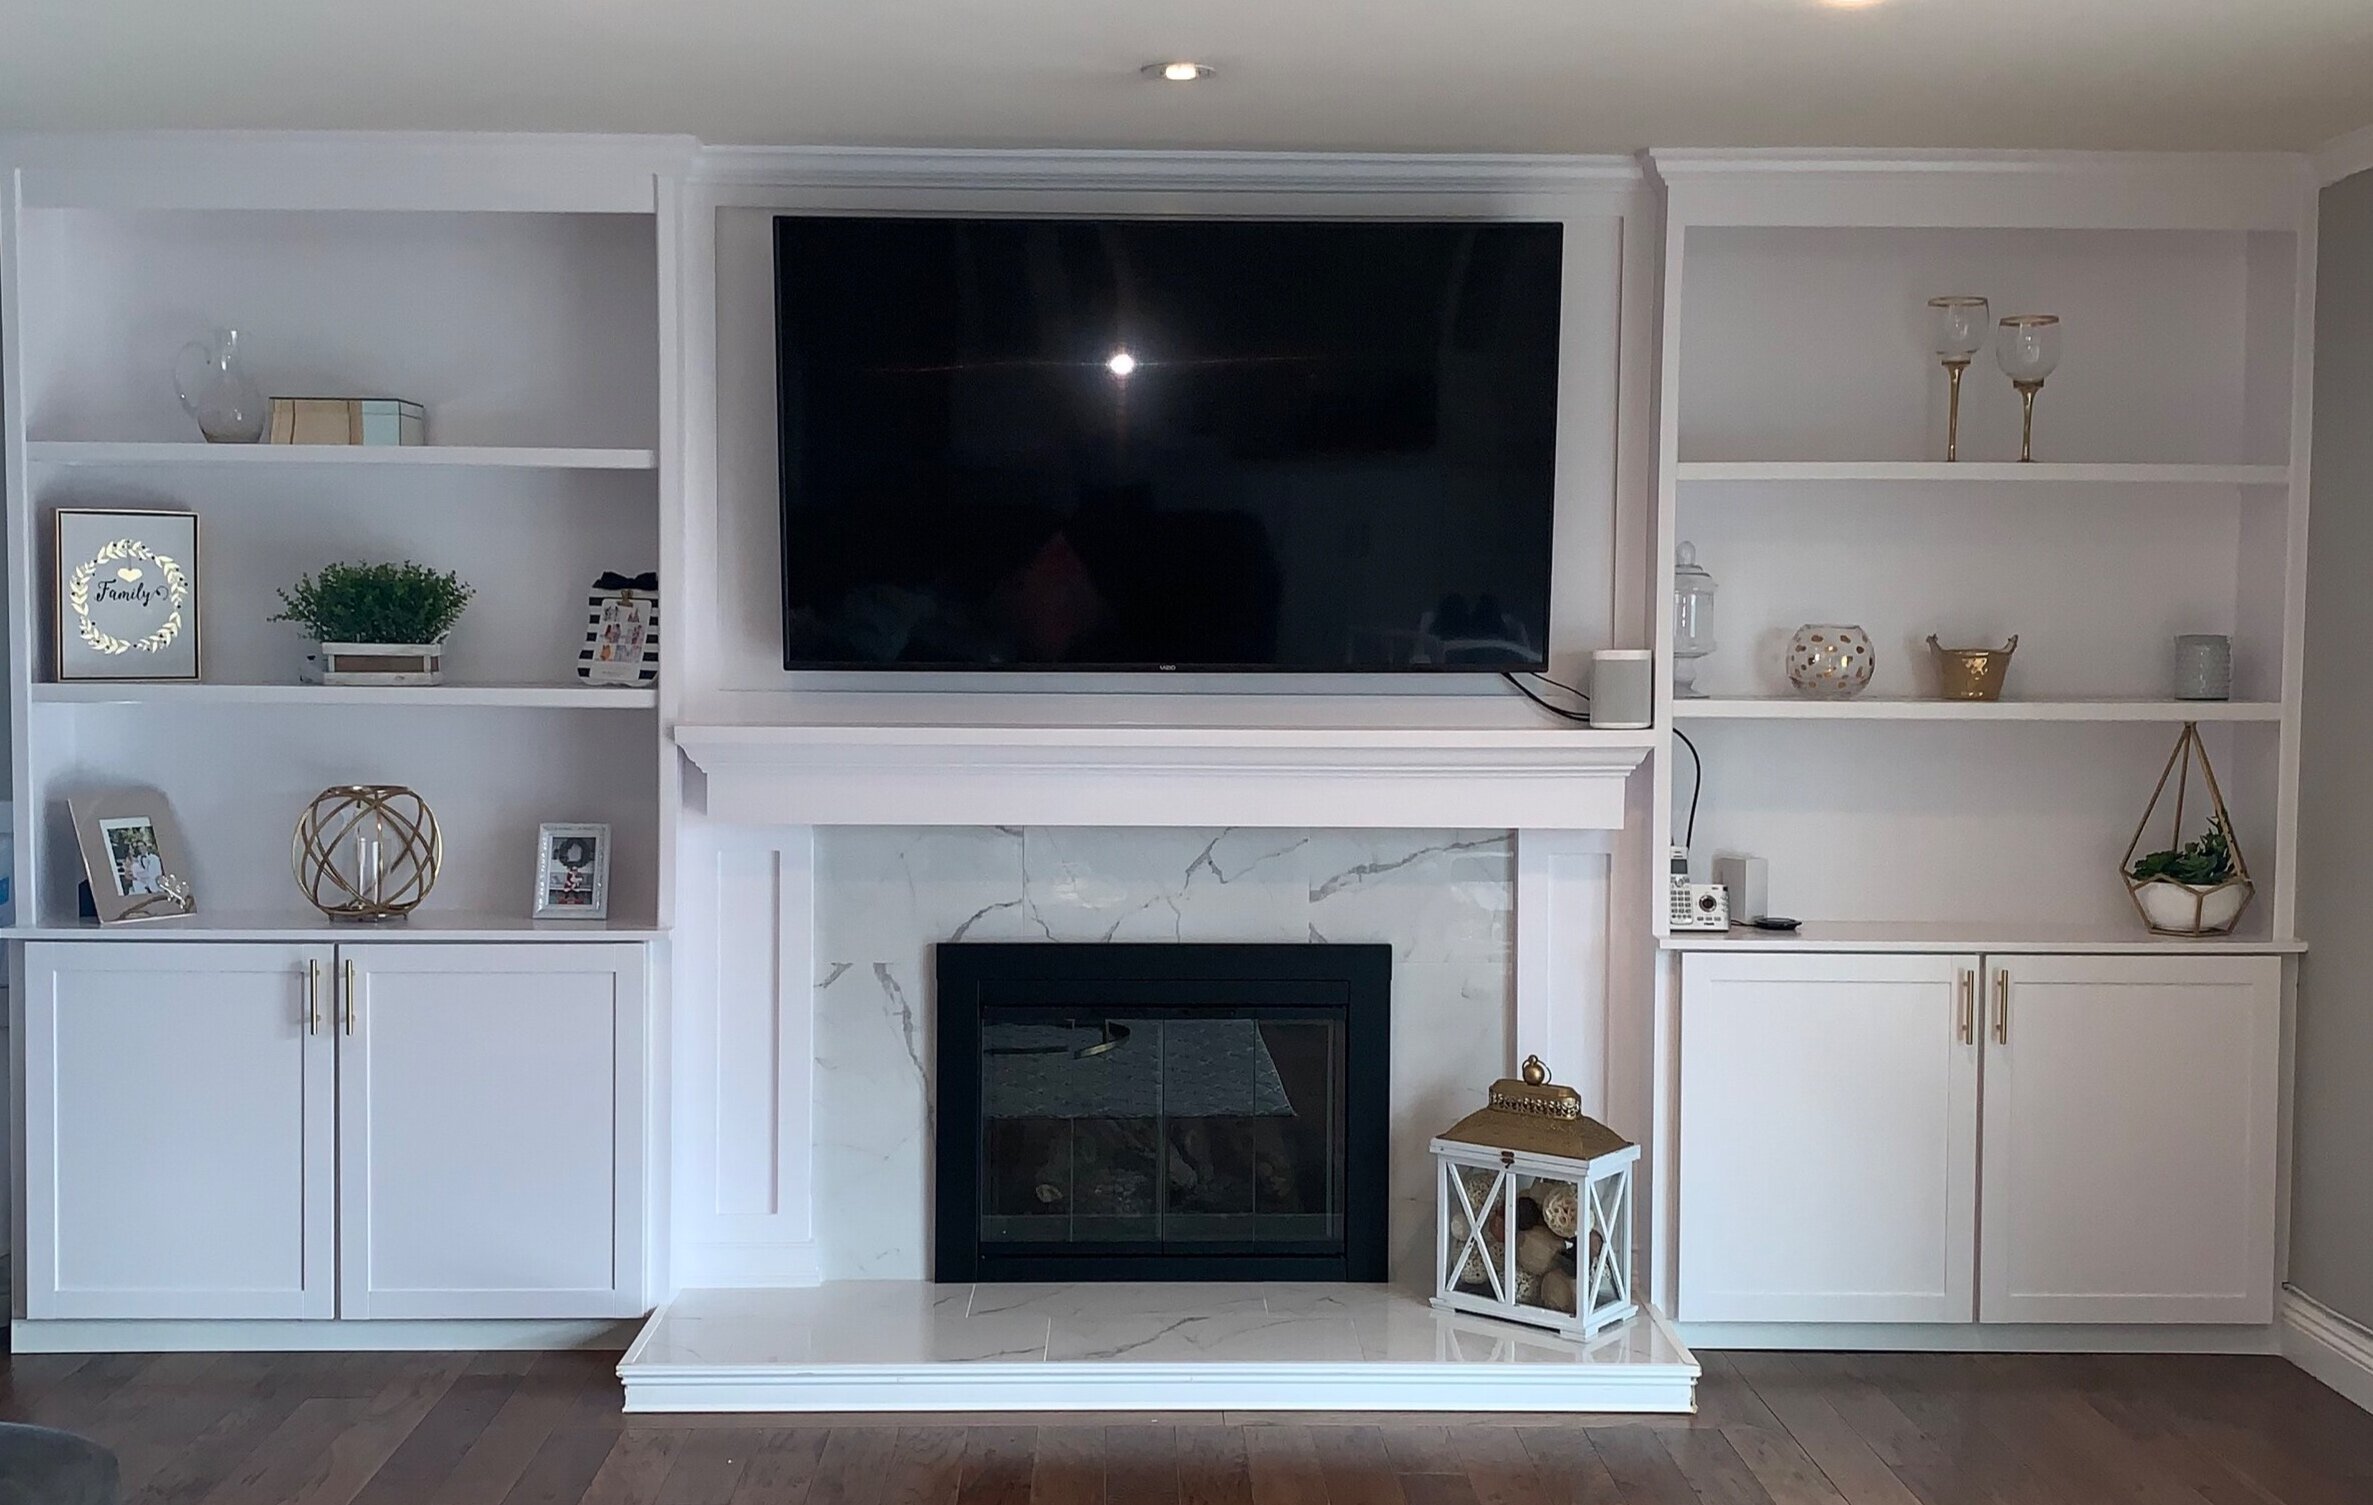 Diy Fireplace Surround And Built Ins, How To Build Bookcase Next Fireplace